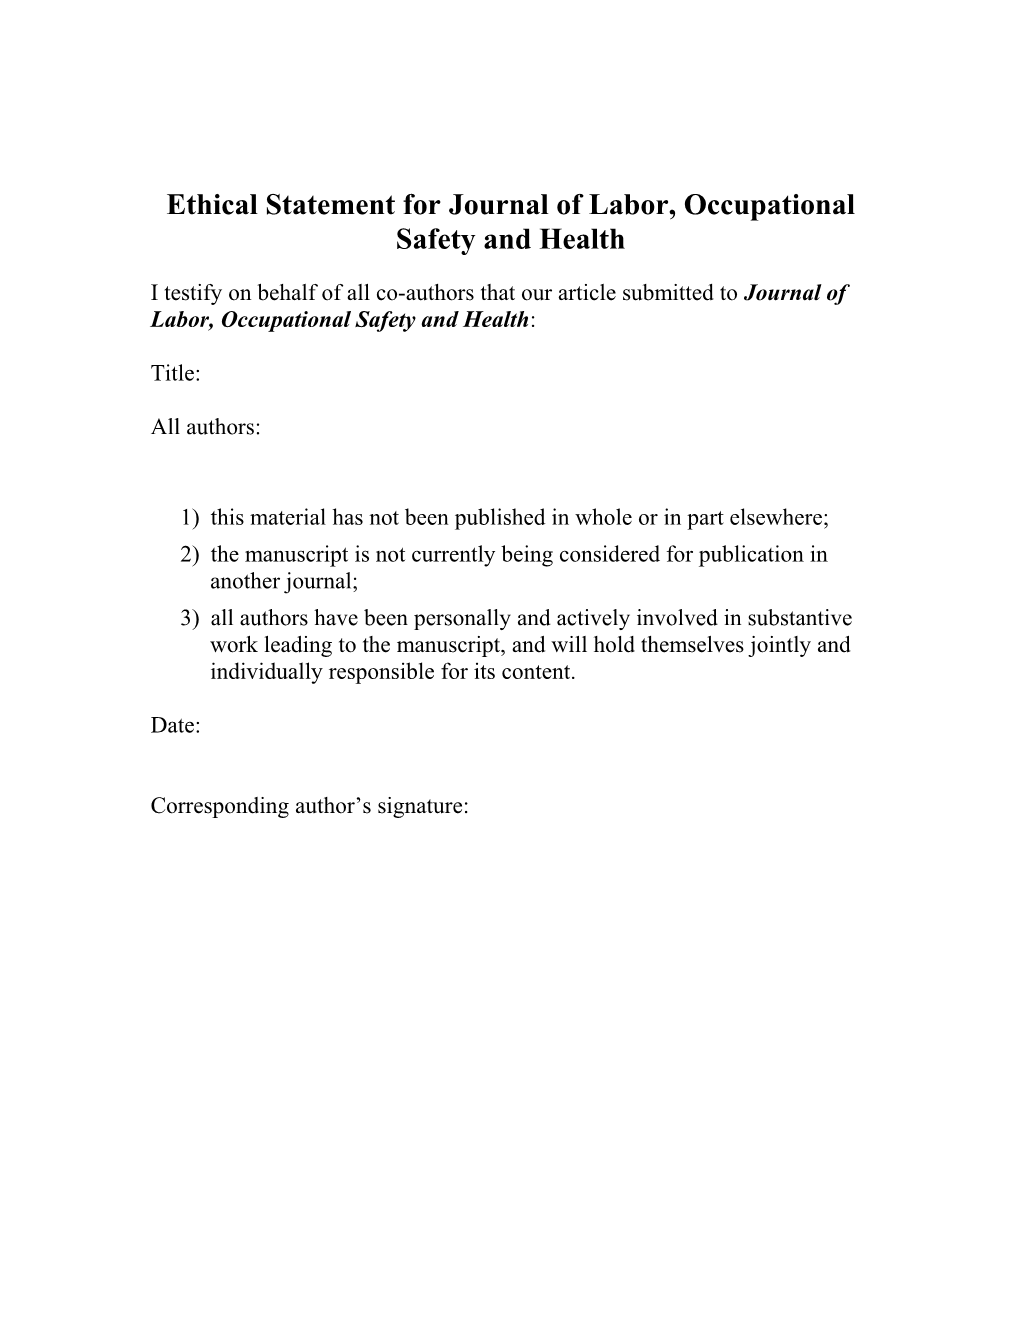 Ethical Statement for Journal of Labor, Occupational Safety and Health